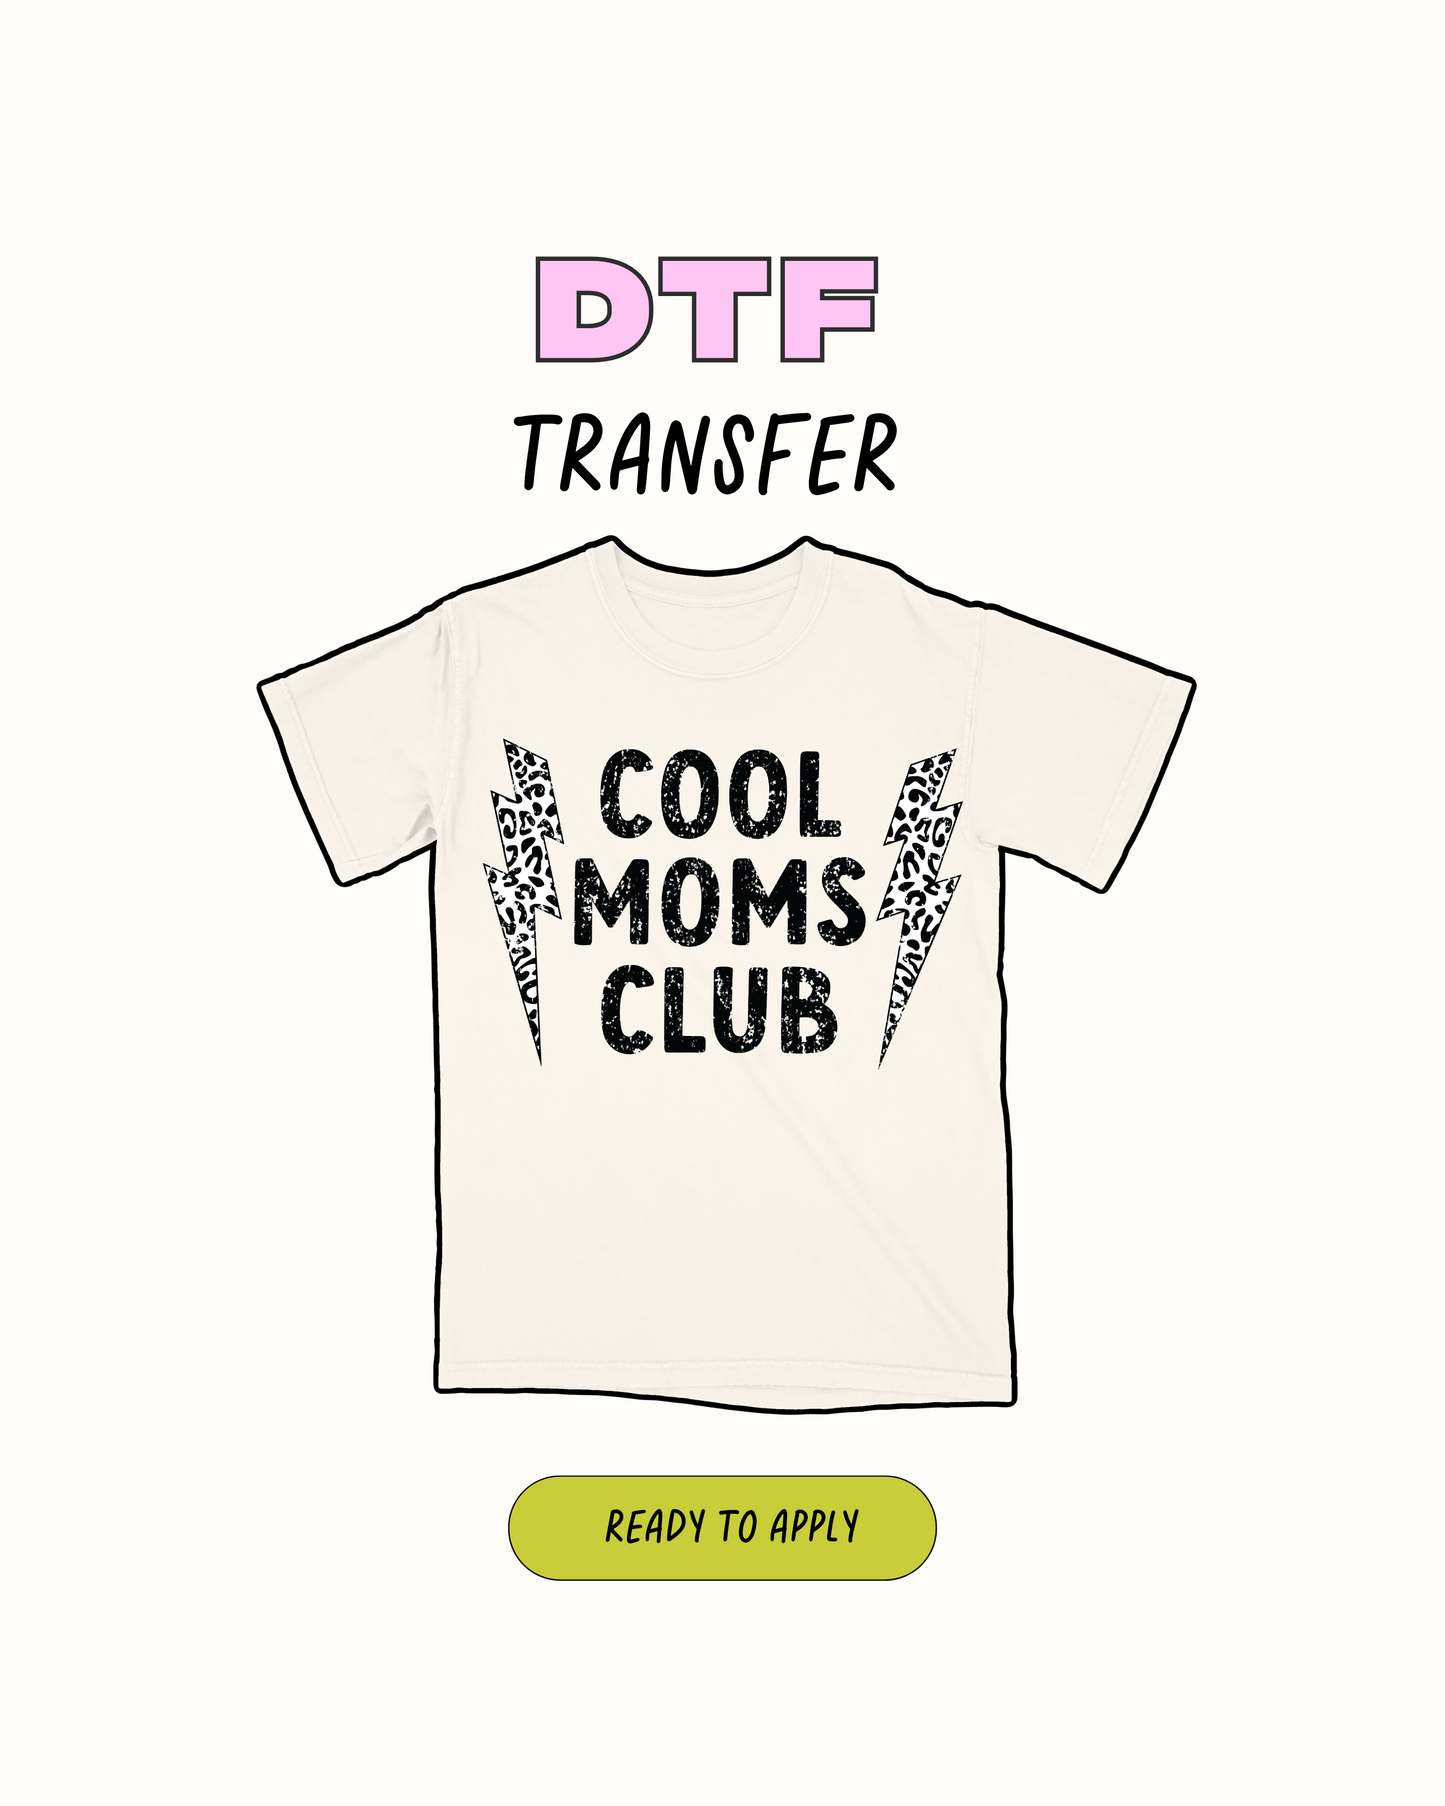 Cool Moms Club - Transferencia DTF